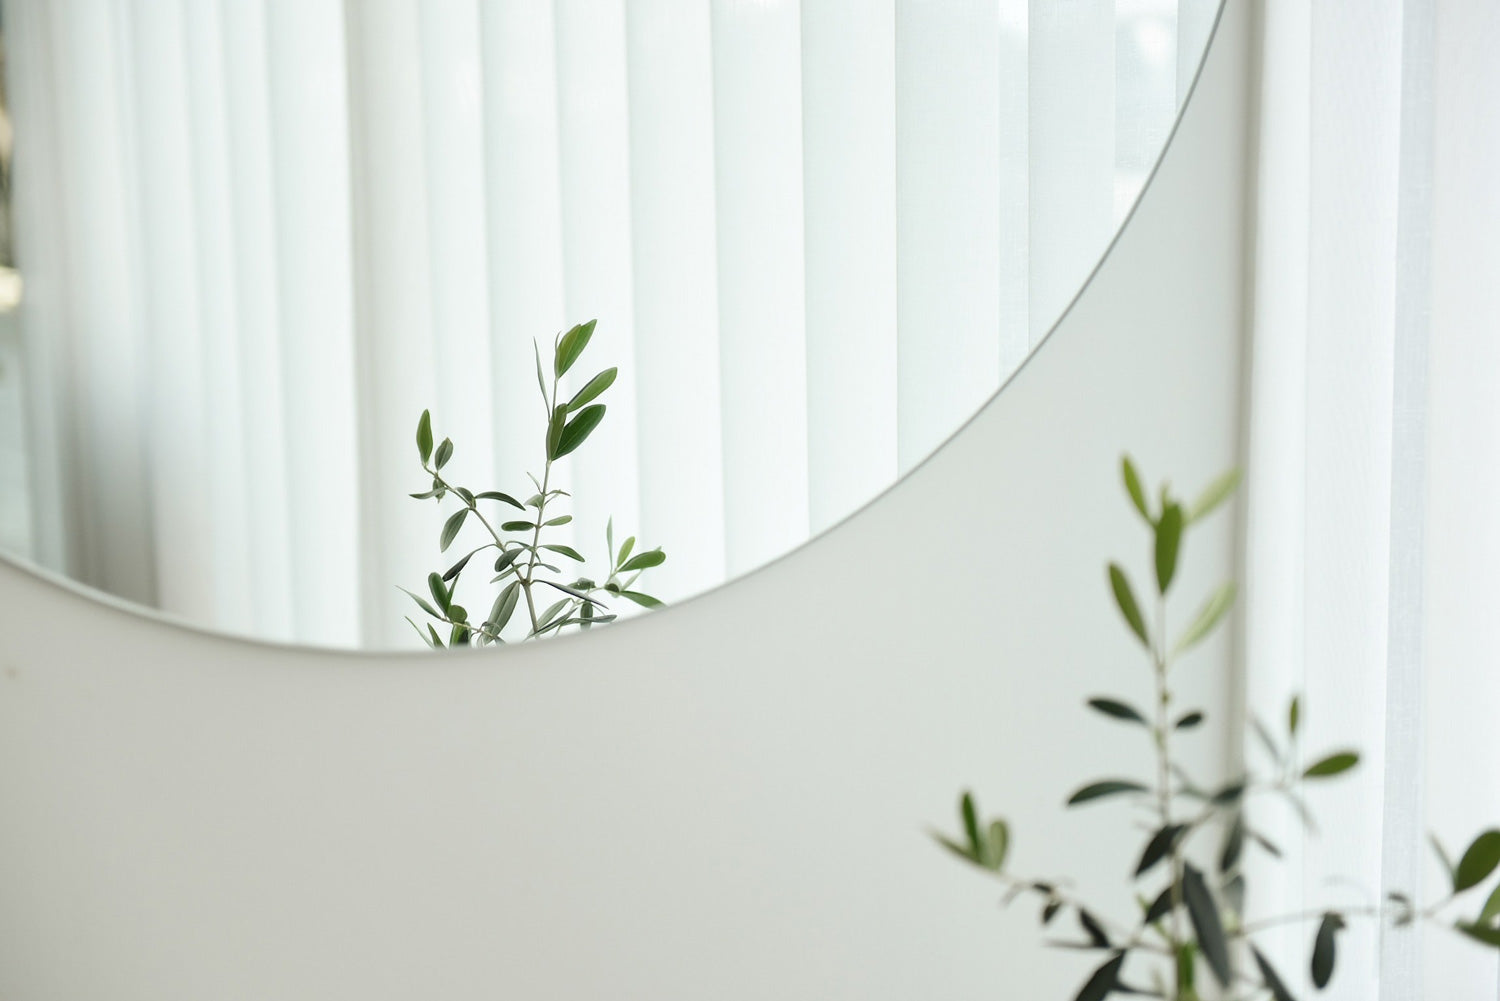 Round Frameless Mirror with small green plant reflection